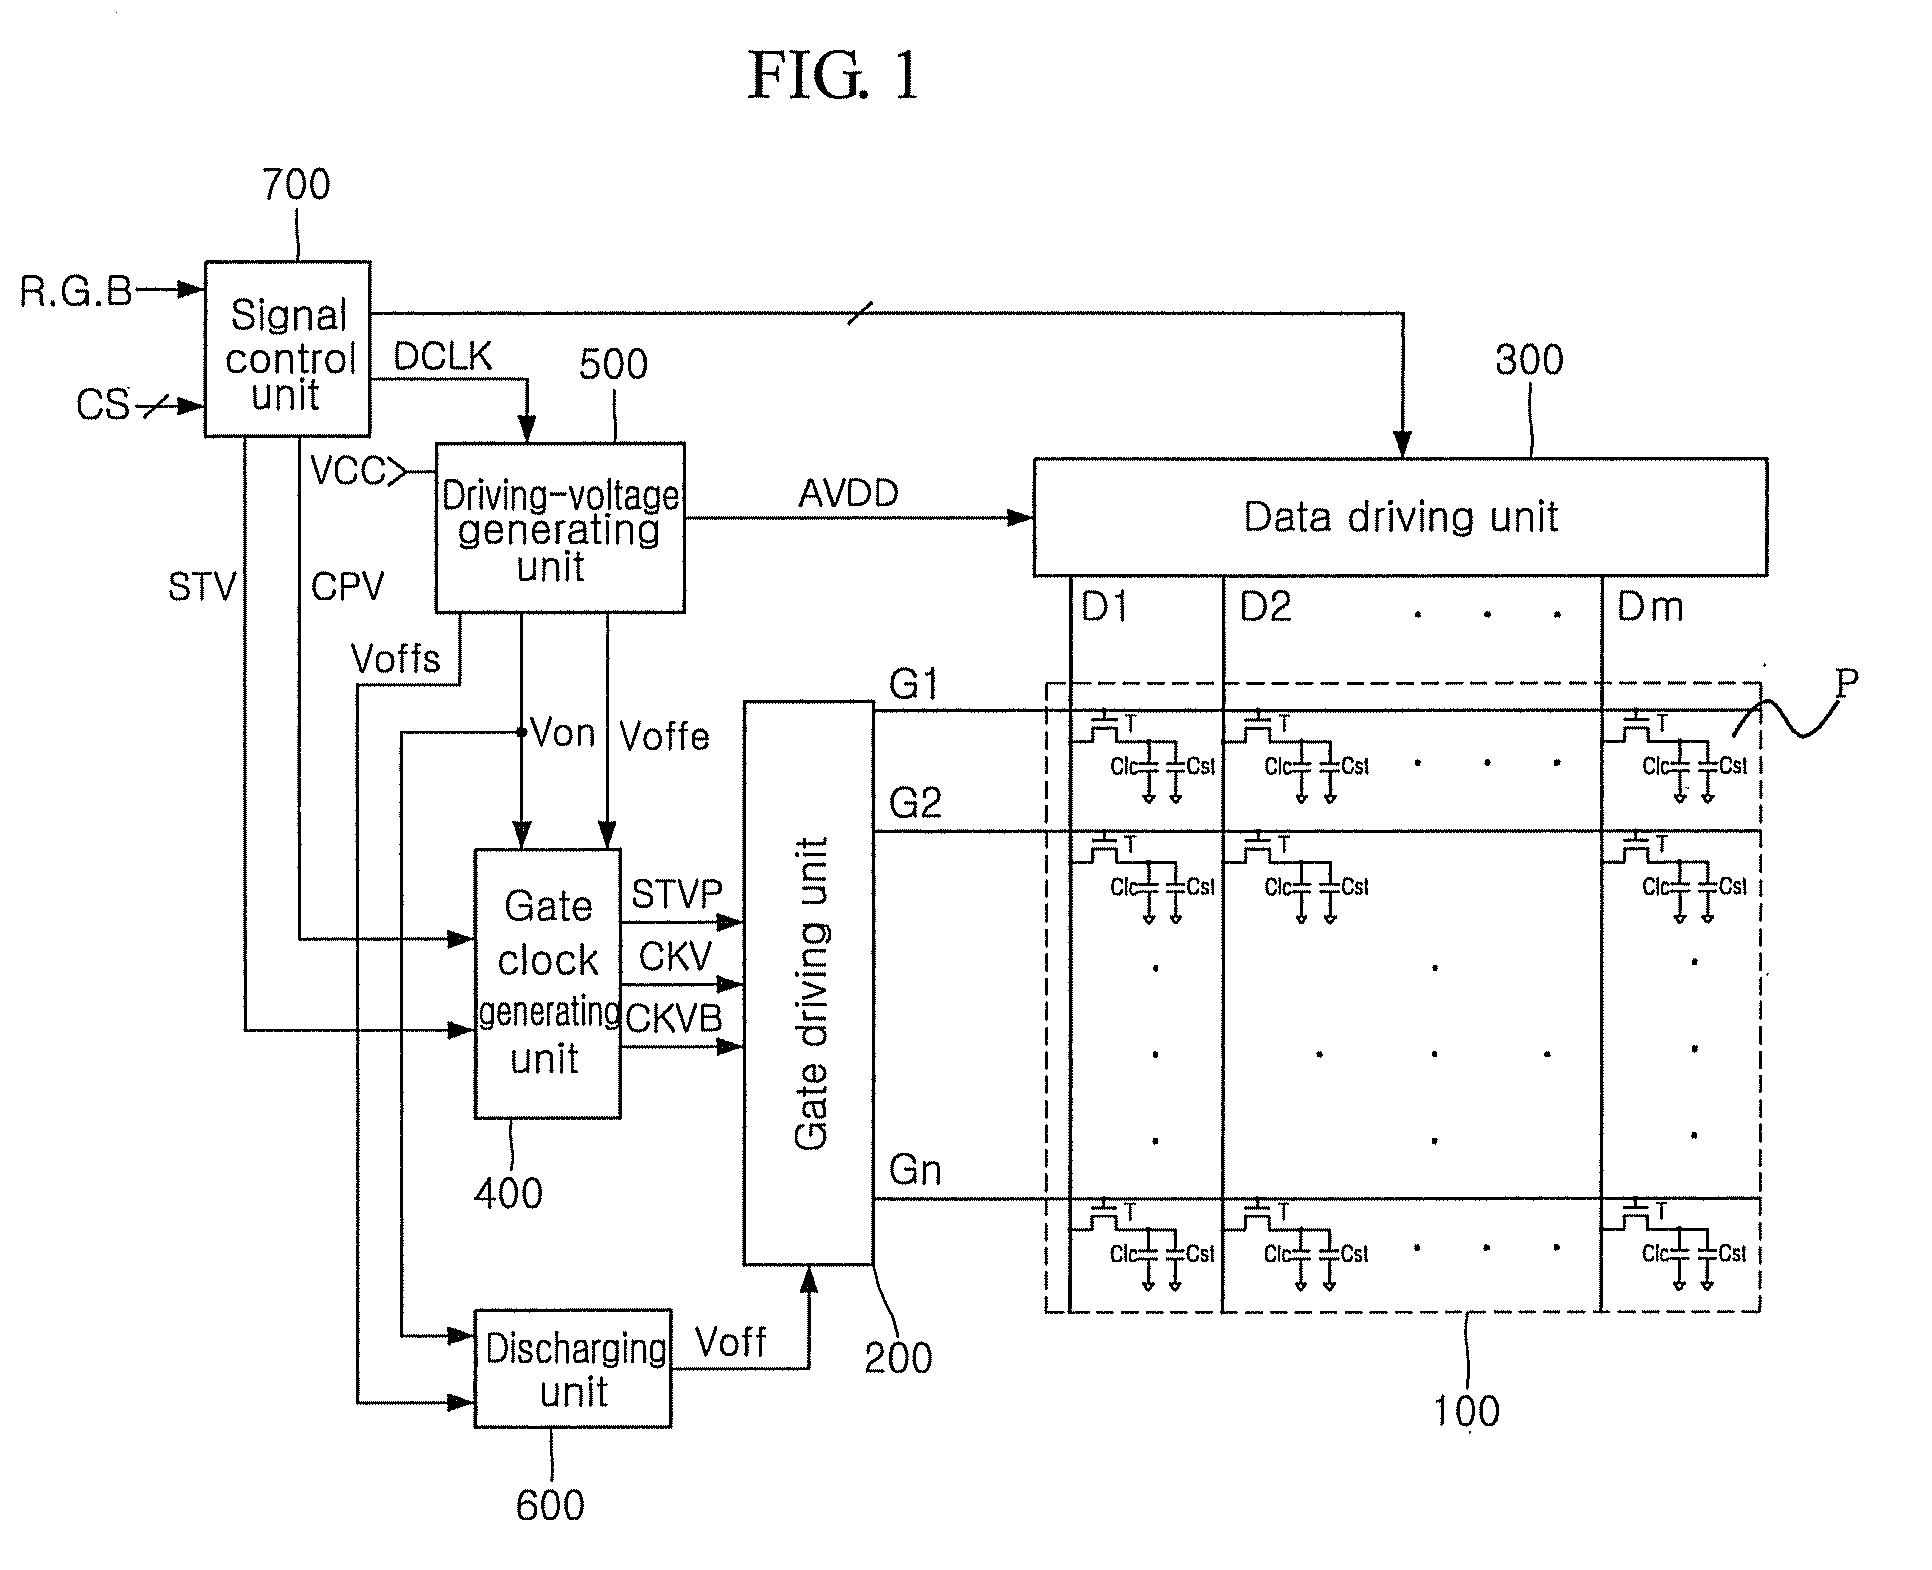 Display and discharging device of the same